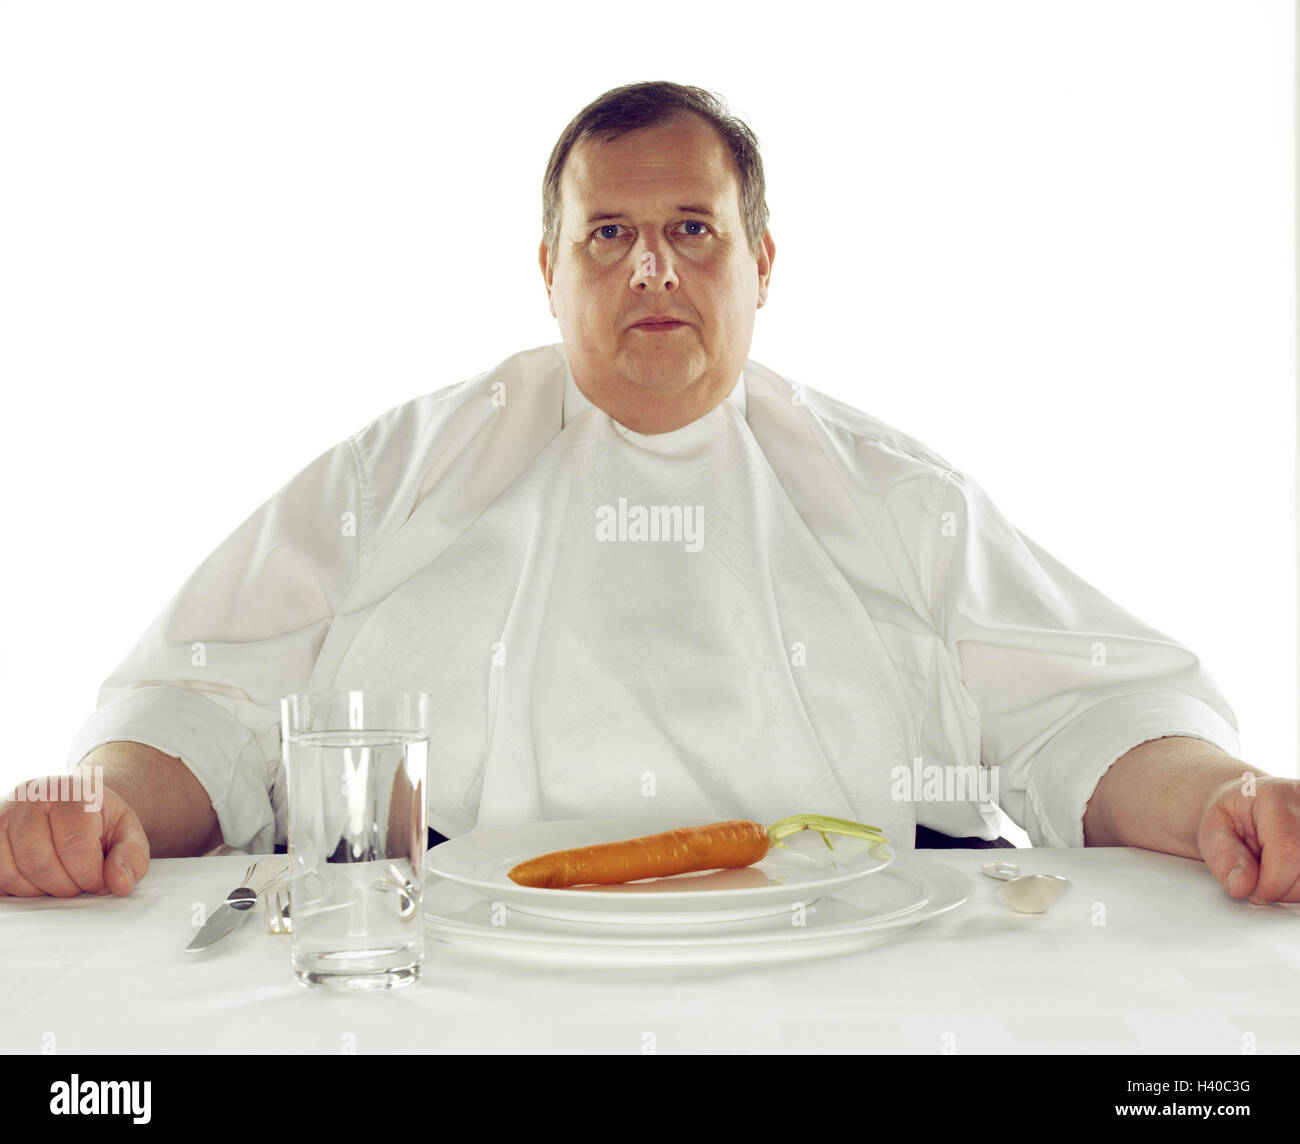 Diet, man, overweight, plate, carrot, seriously middle old person, thickly, bold, overweight, unhealthily, injuriously, adiposity, obesity, fatly, obesity, health risk, head rest on, table, dining table, covered, glass, water, water glass, cover, carrot, Stock Photo